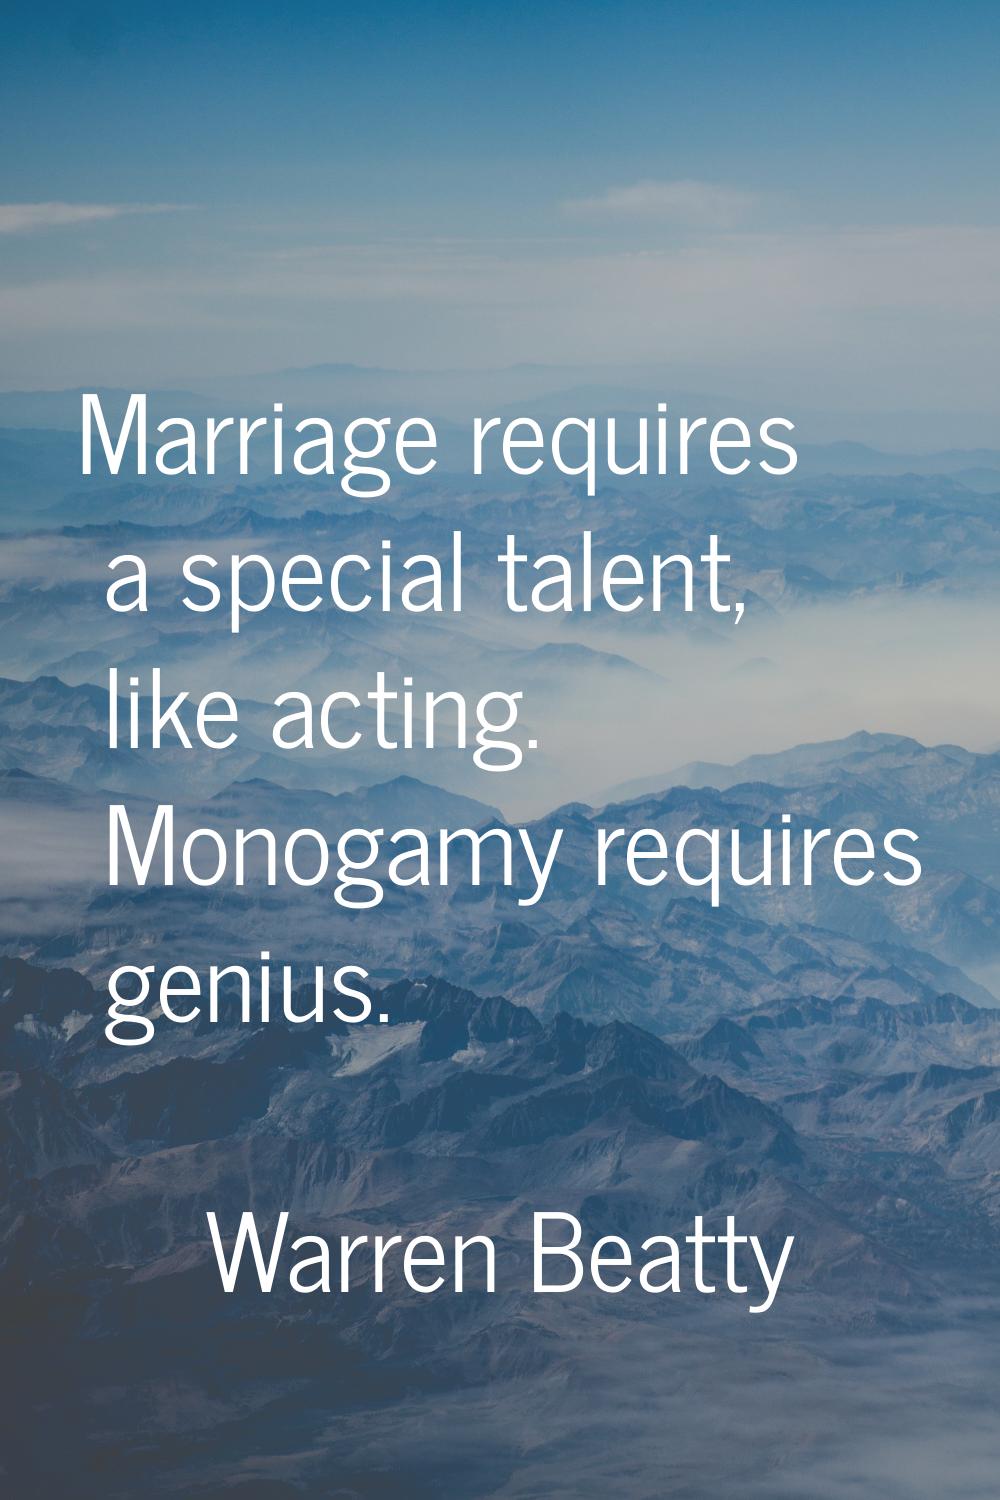 Marriage requires a special talent, like acting. Monogamy requires genius.